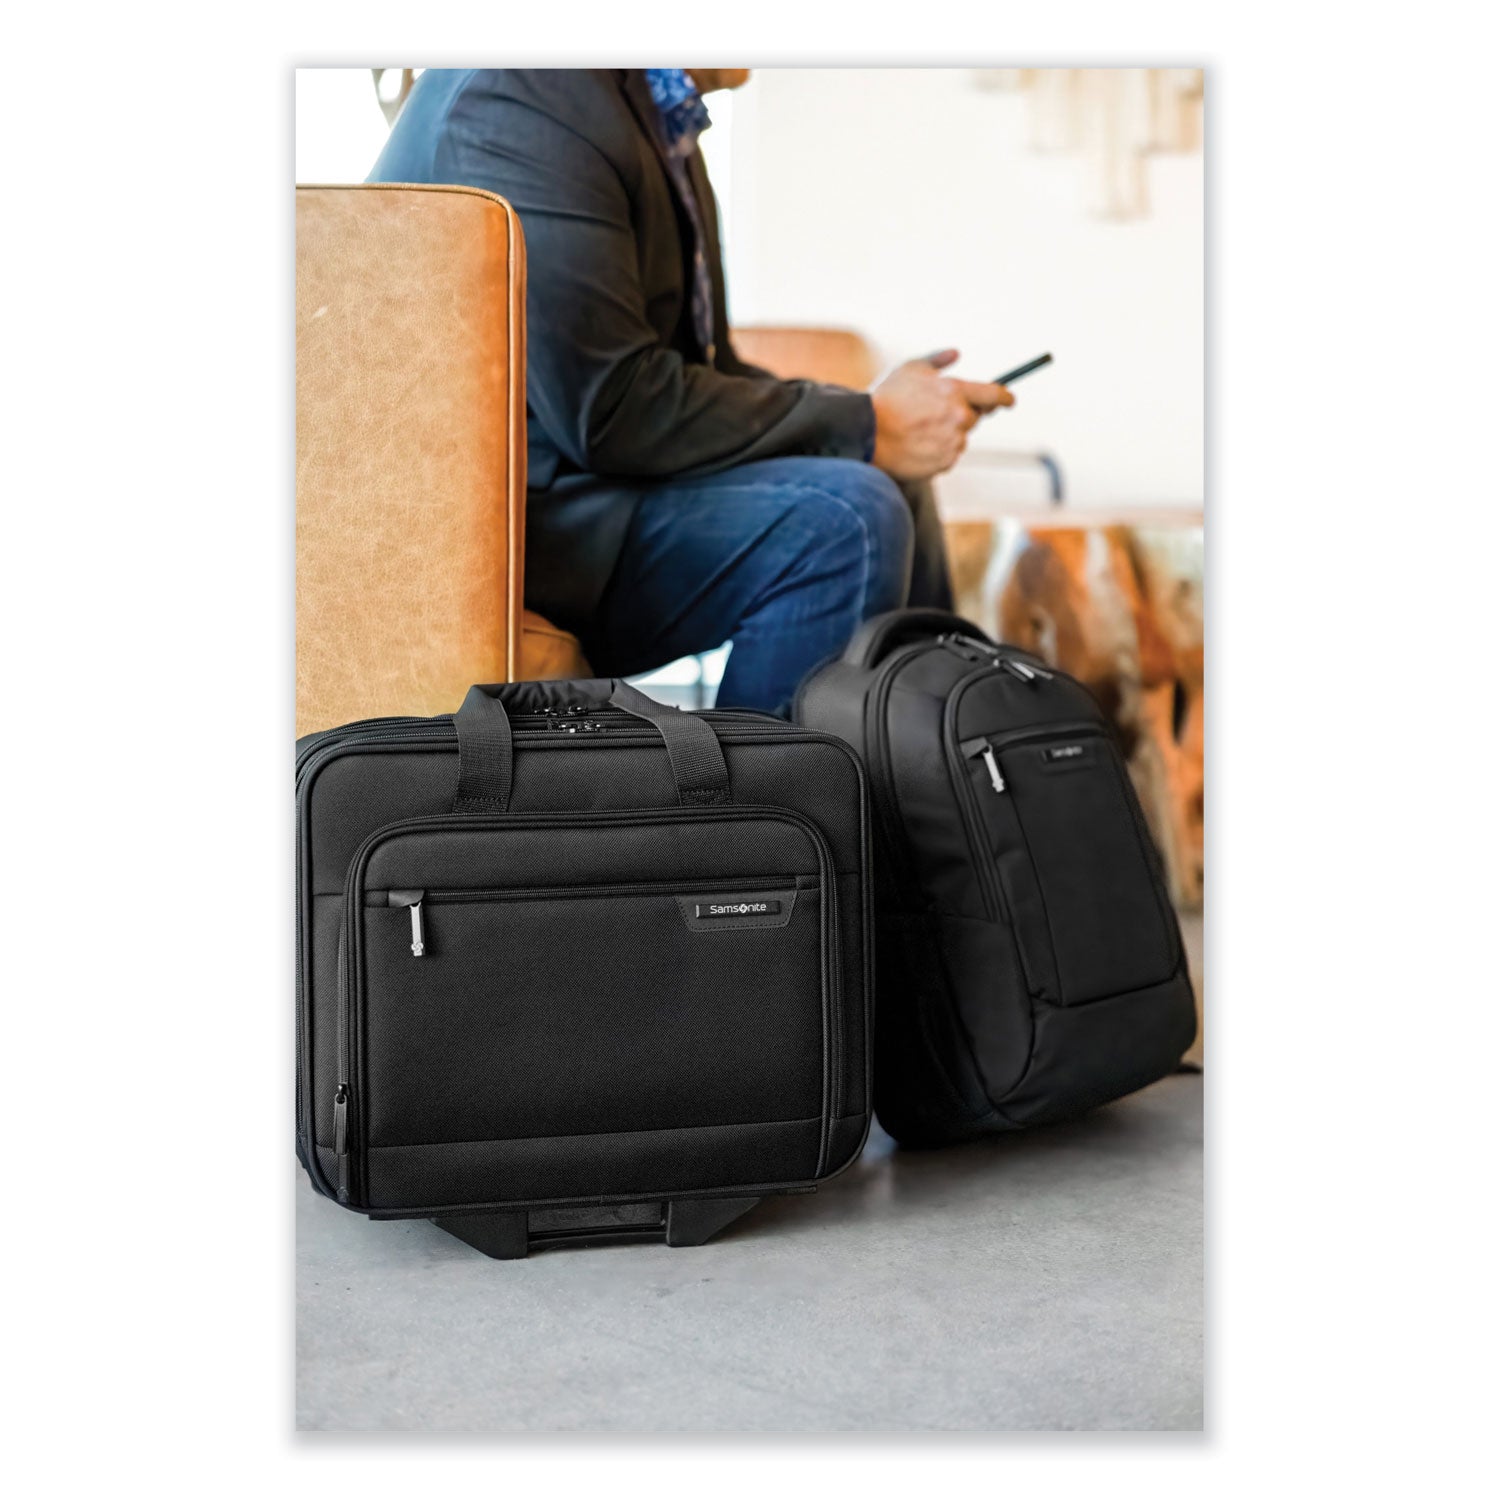 rolling-business-case-fits-devices-up-to-156-polyester-1654-x-8-x-906-black_sml1412781041 - 3